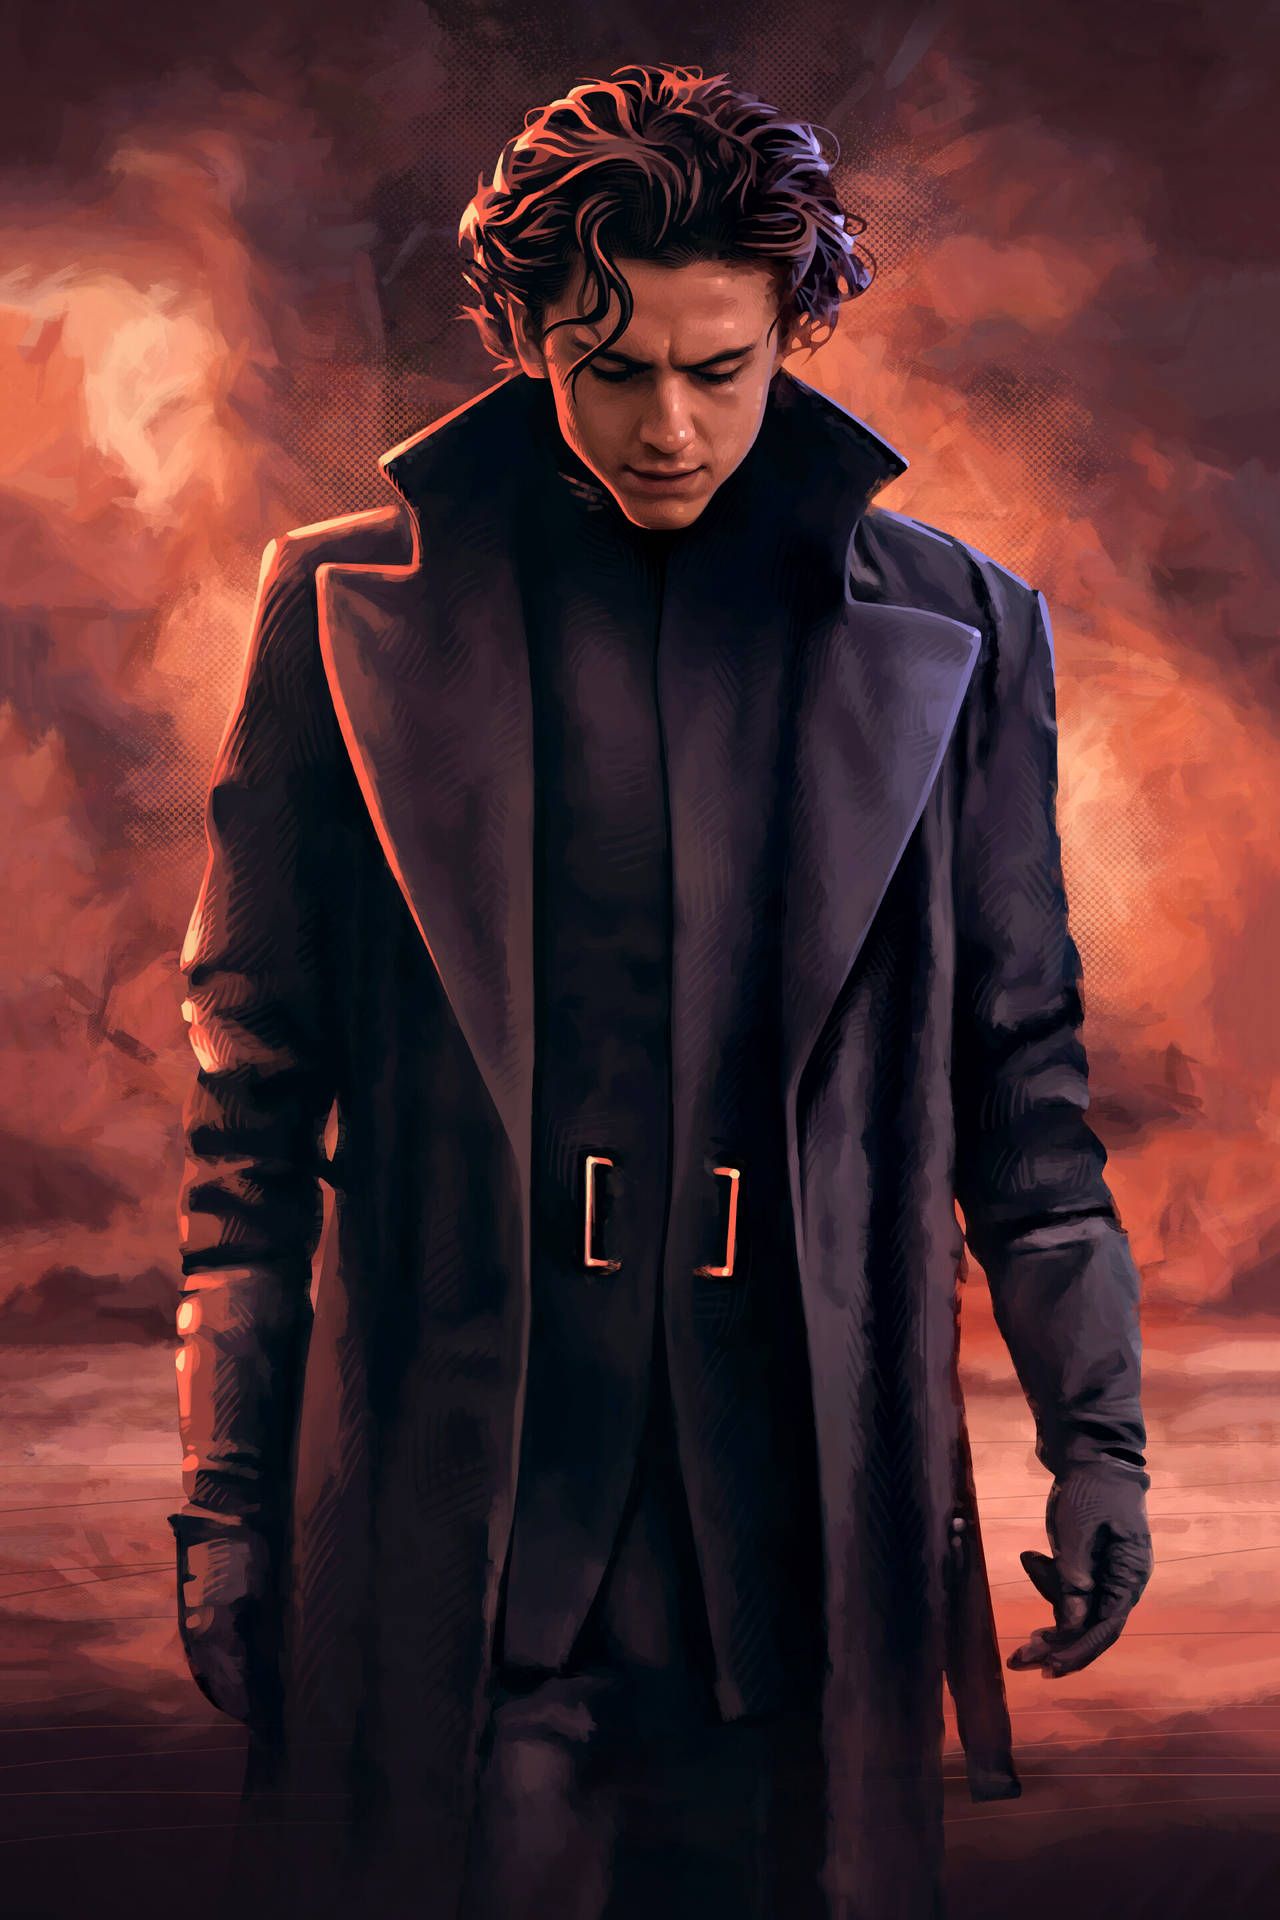 A digital painting of a man in a black trench coat standing in front of a red sky - Timothee Chalamet